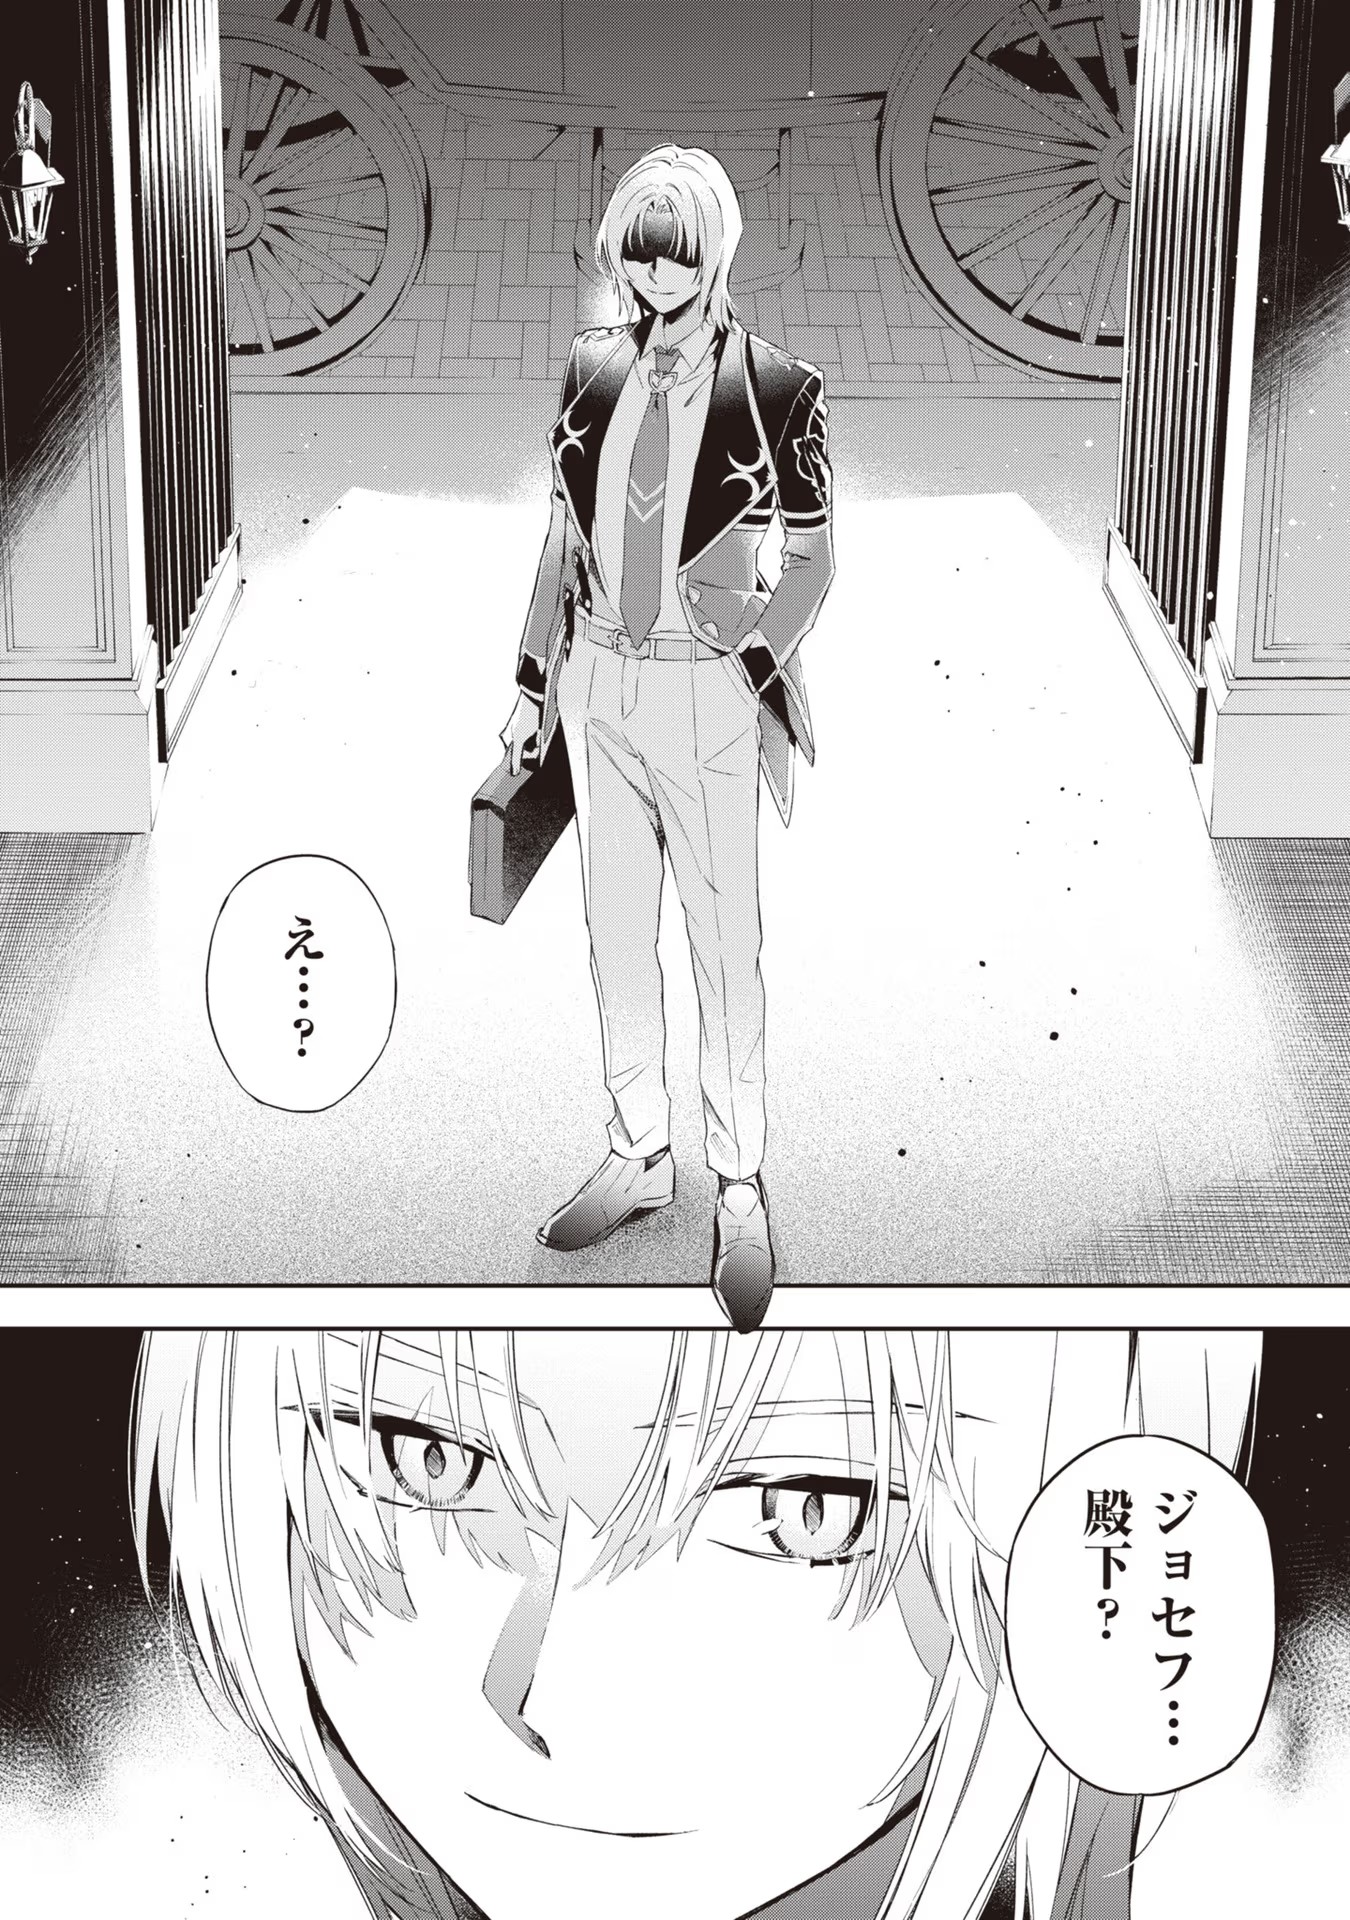 Kyou mo Reisoku to Kisoiatte Iru you desu If the Villainess and the Villain Were to Meet and Fall in Love ~It Seems the Shunned Heroine Who Formed a Contract With an Unnamed Spirit Is Fighting With the Nobleman Yet Again~ If the Villainess and Villain Met 第14話 - Page 32